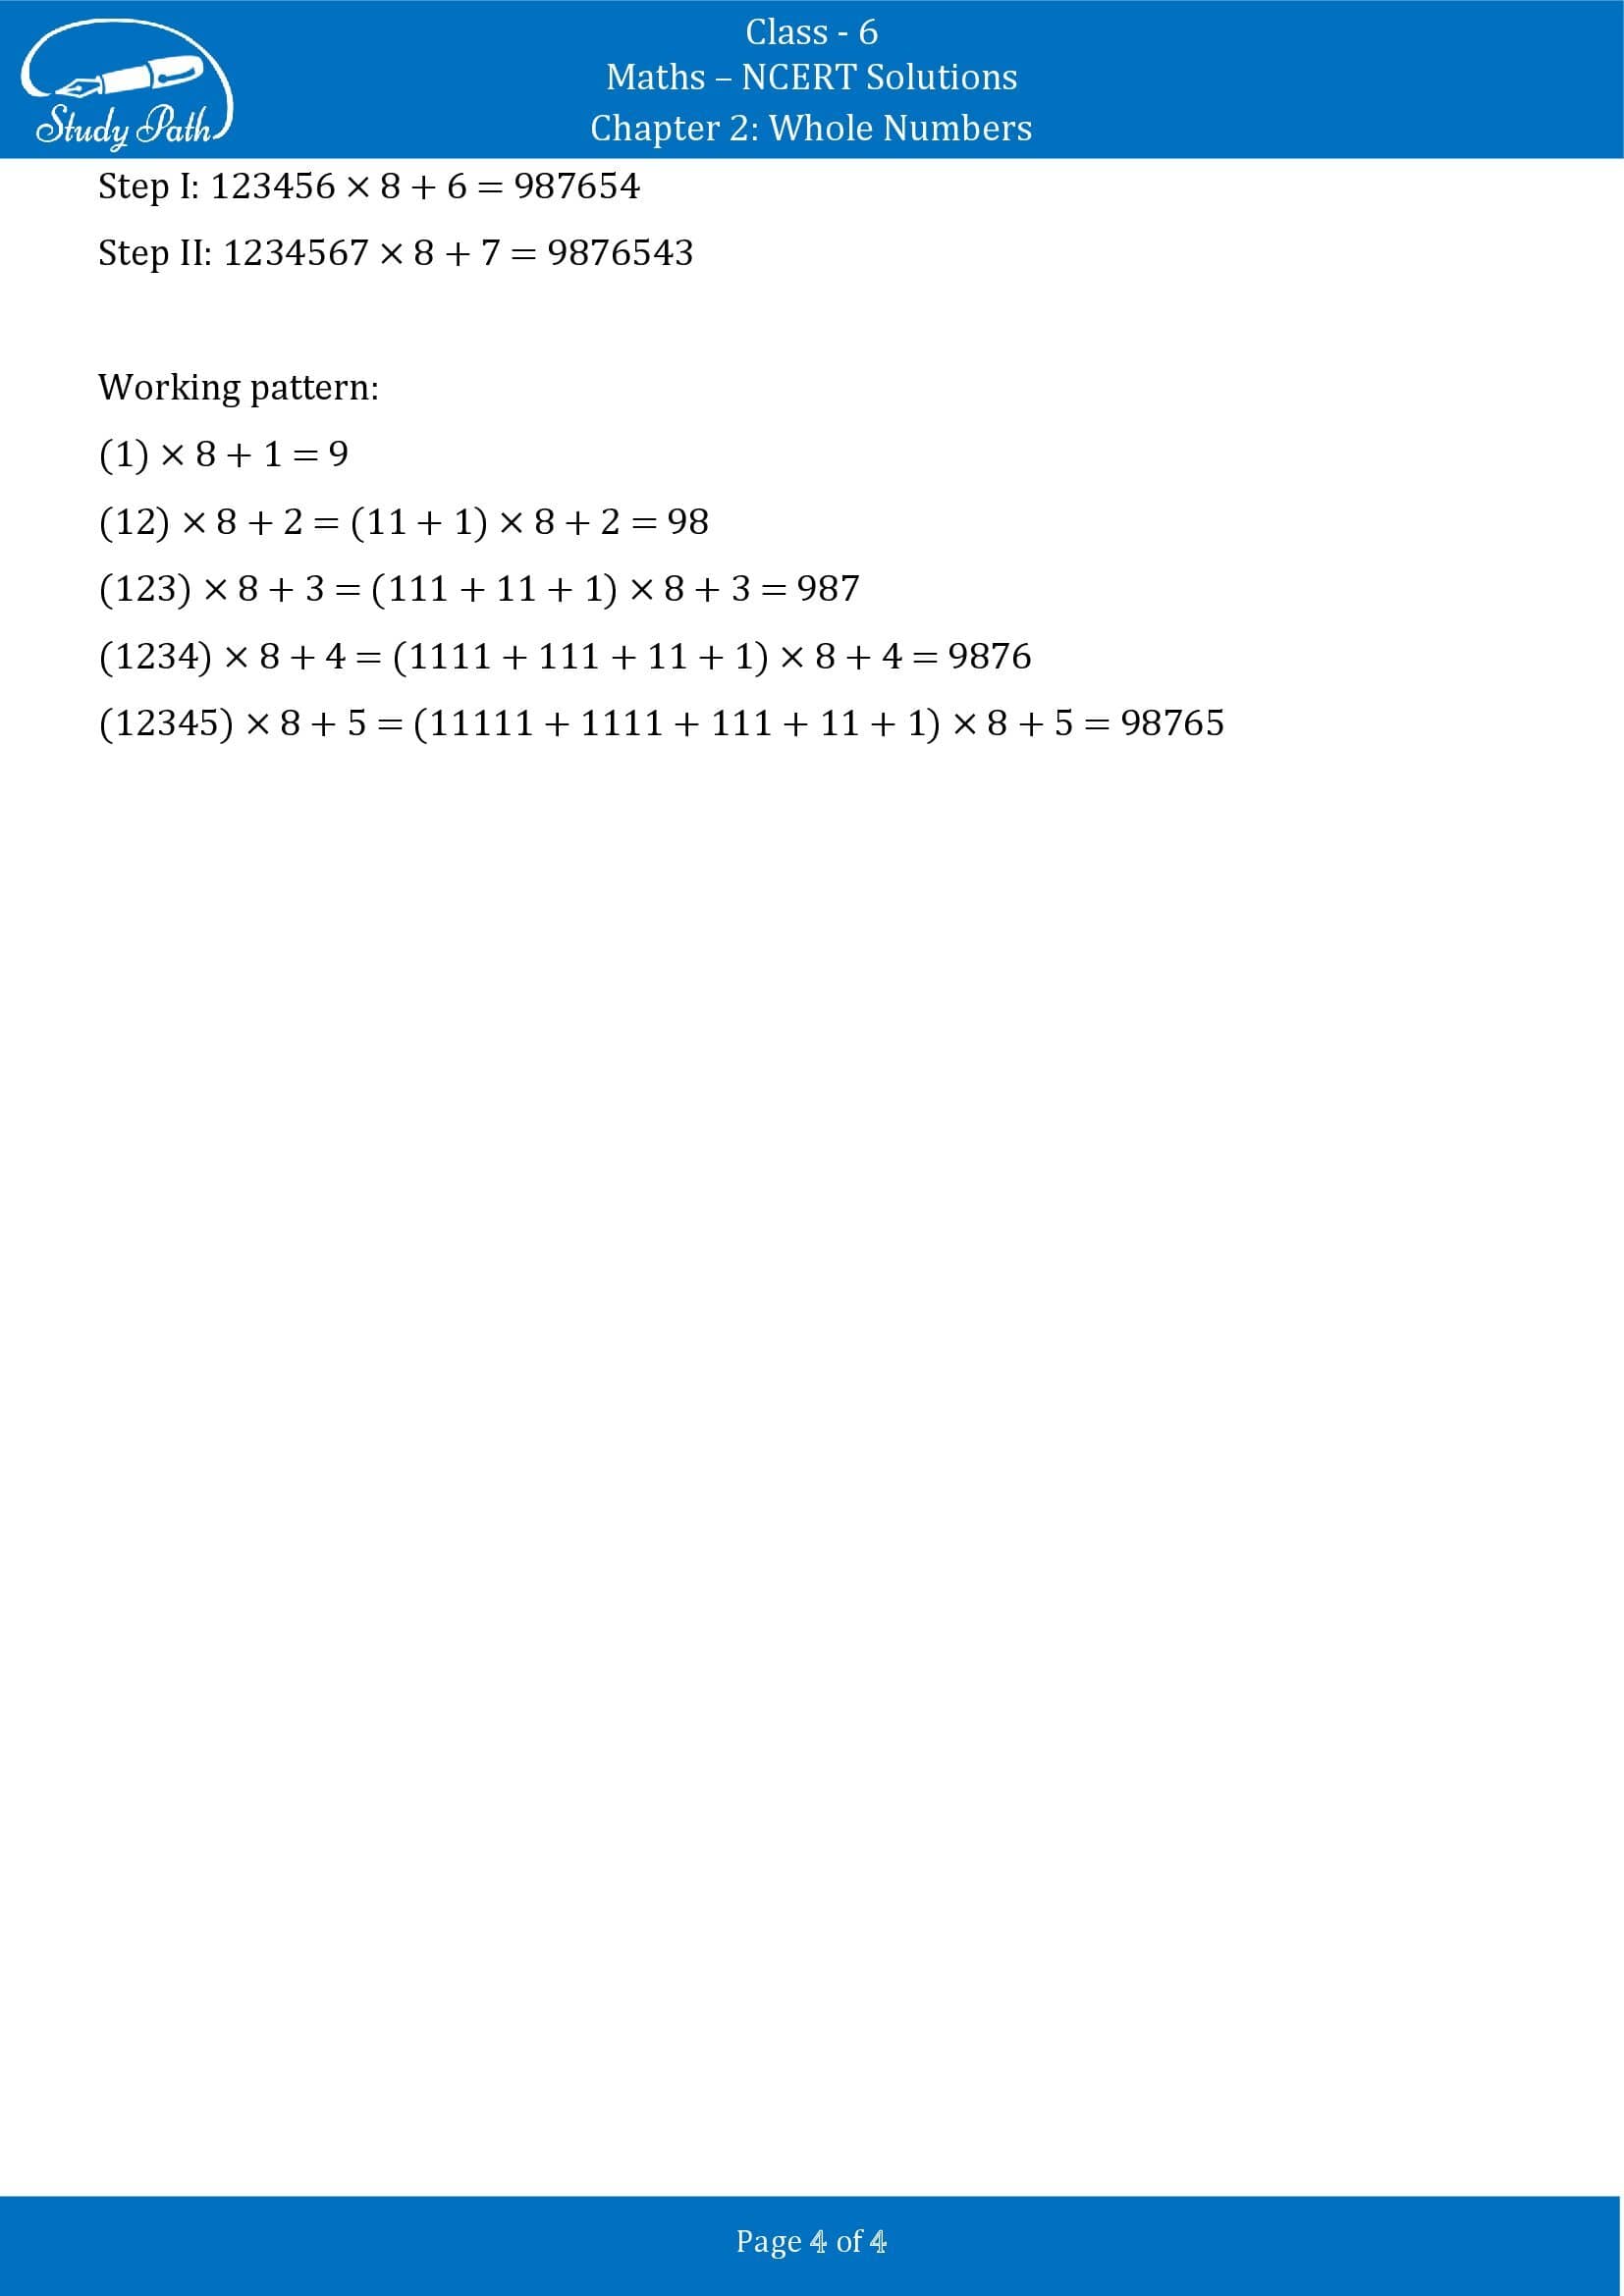 NCERT Solutions for Class 6 Maths Chapter 2 Whole Numbers Exercise 2.3 00004